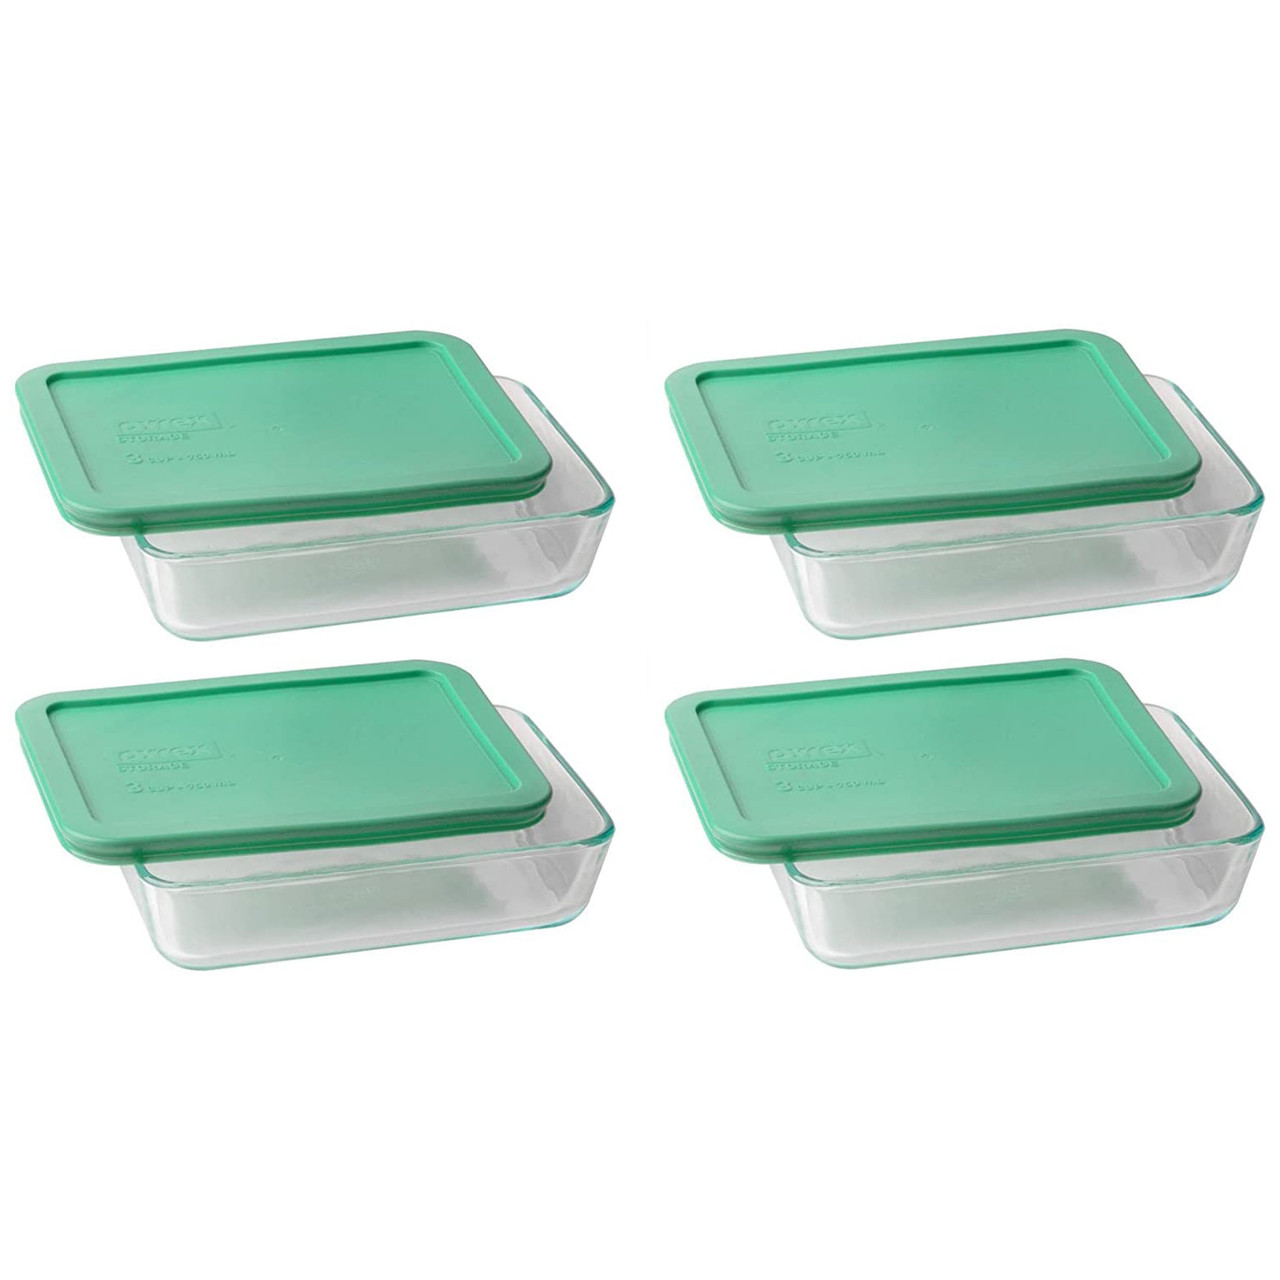 Pyrex 7210 3-Cup Glass Food Storage Dishes w/ 7210-PC Light Green Lids (4-Pack)